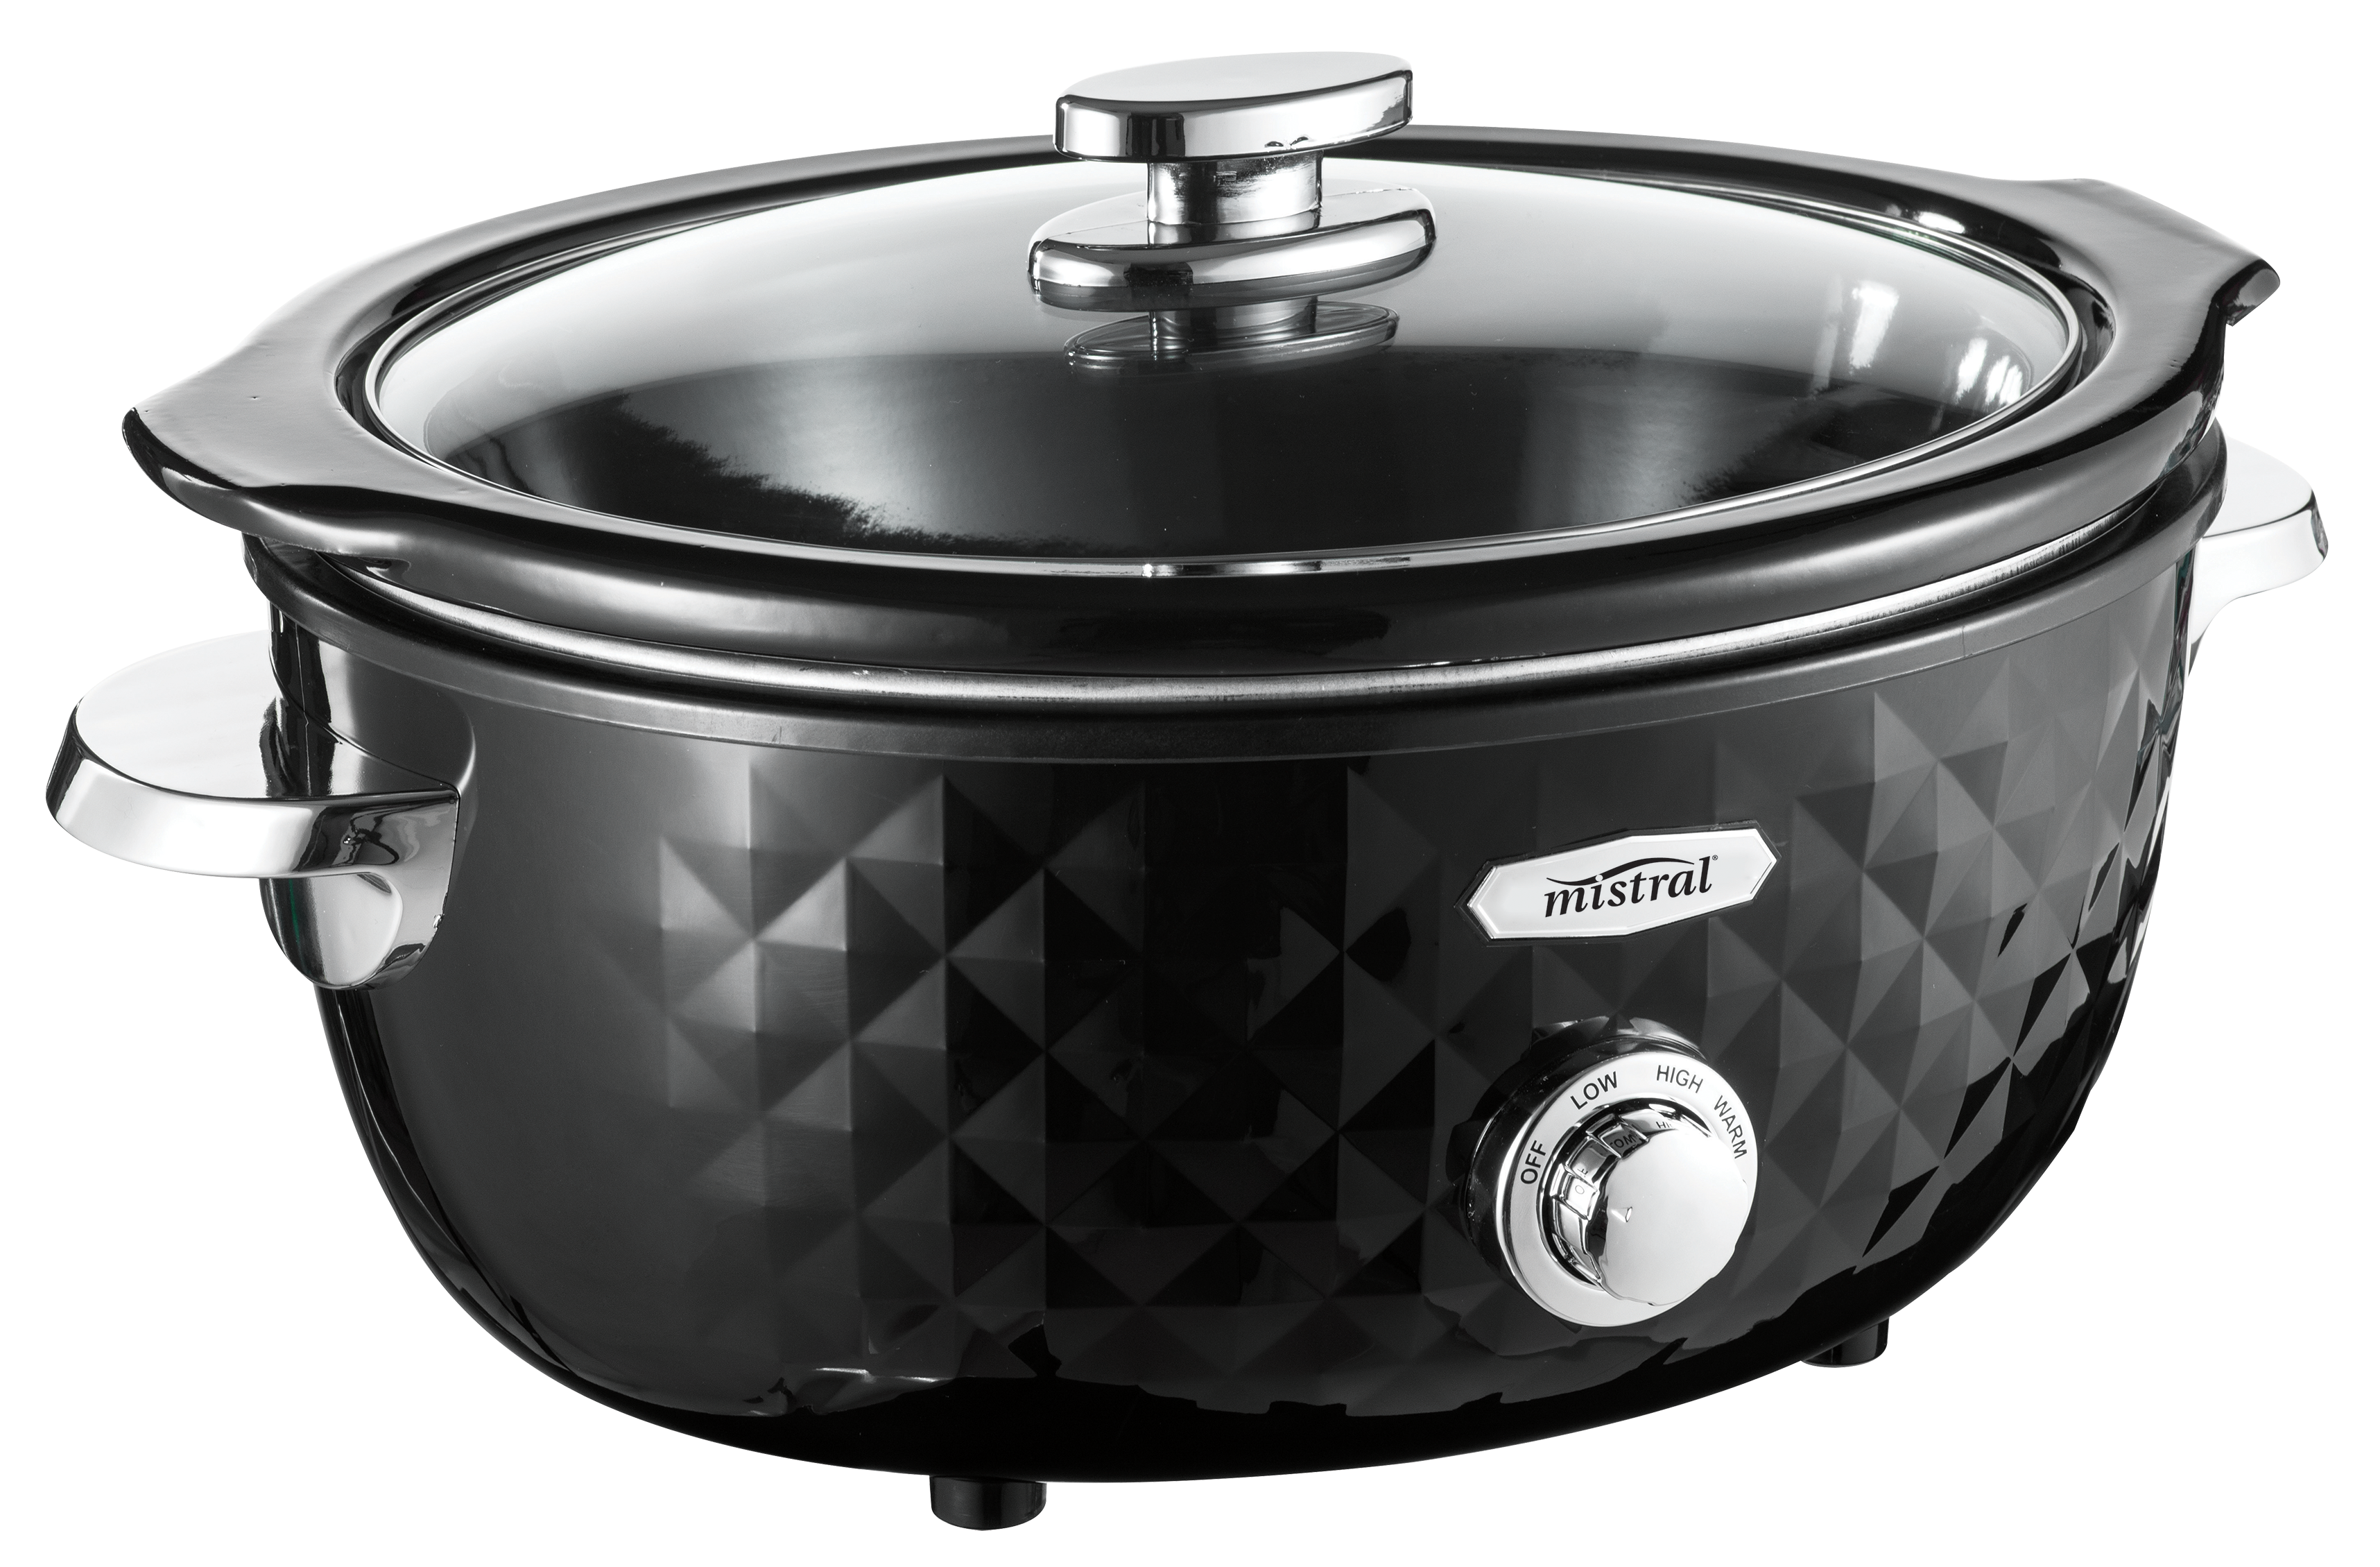 Slow cook in style using the 3.3 Litre Slow Cooker Black by Mistral